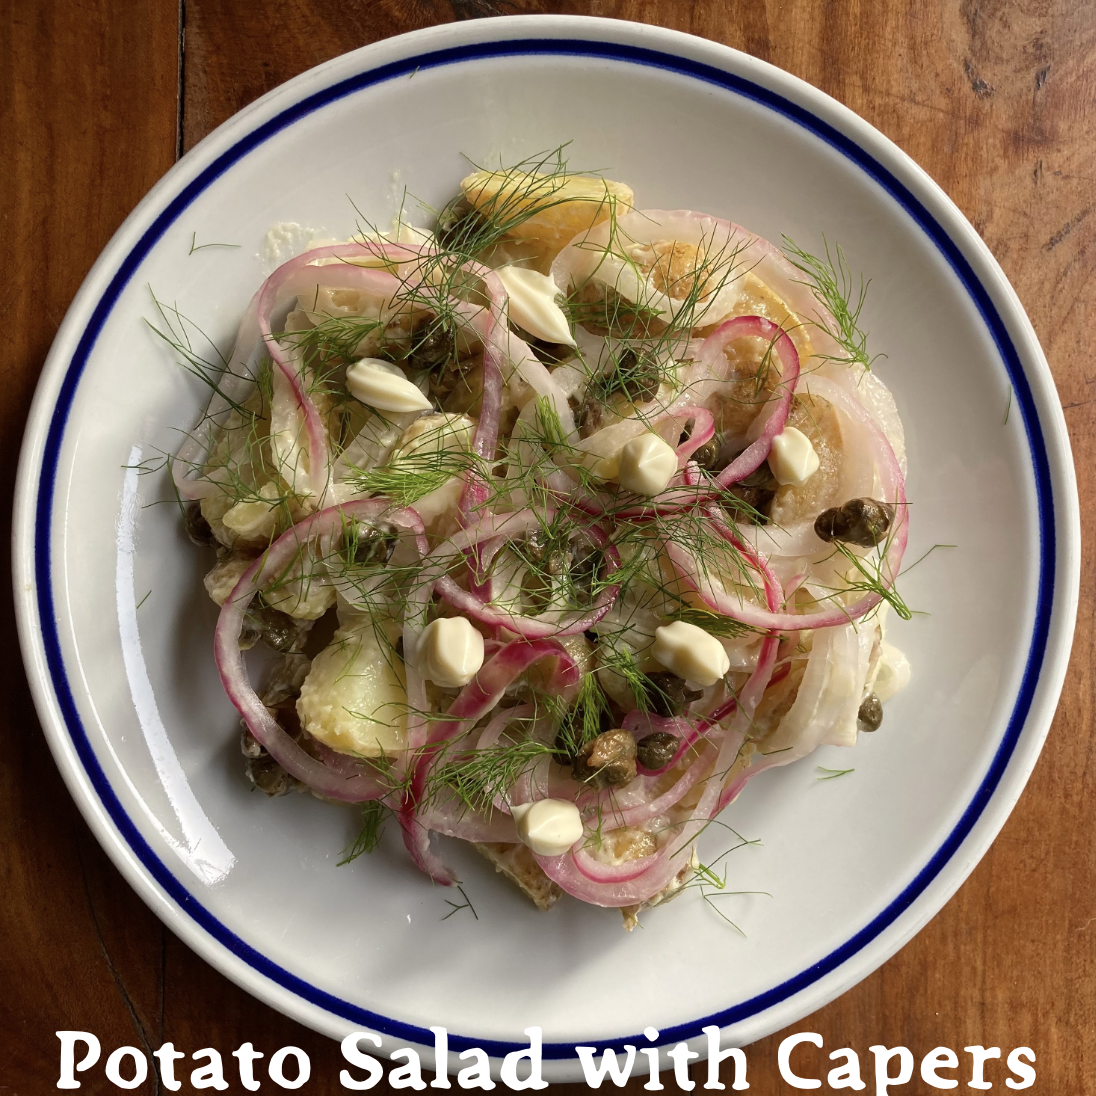 A white ceramic plate on wooden table surface, layer with wedges of potatoes, pickled red onions, capers, dollops of mayonnaise, and fresh fennel fronds. "Potato Salad with Capers" is written at the bottom.